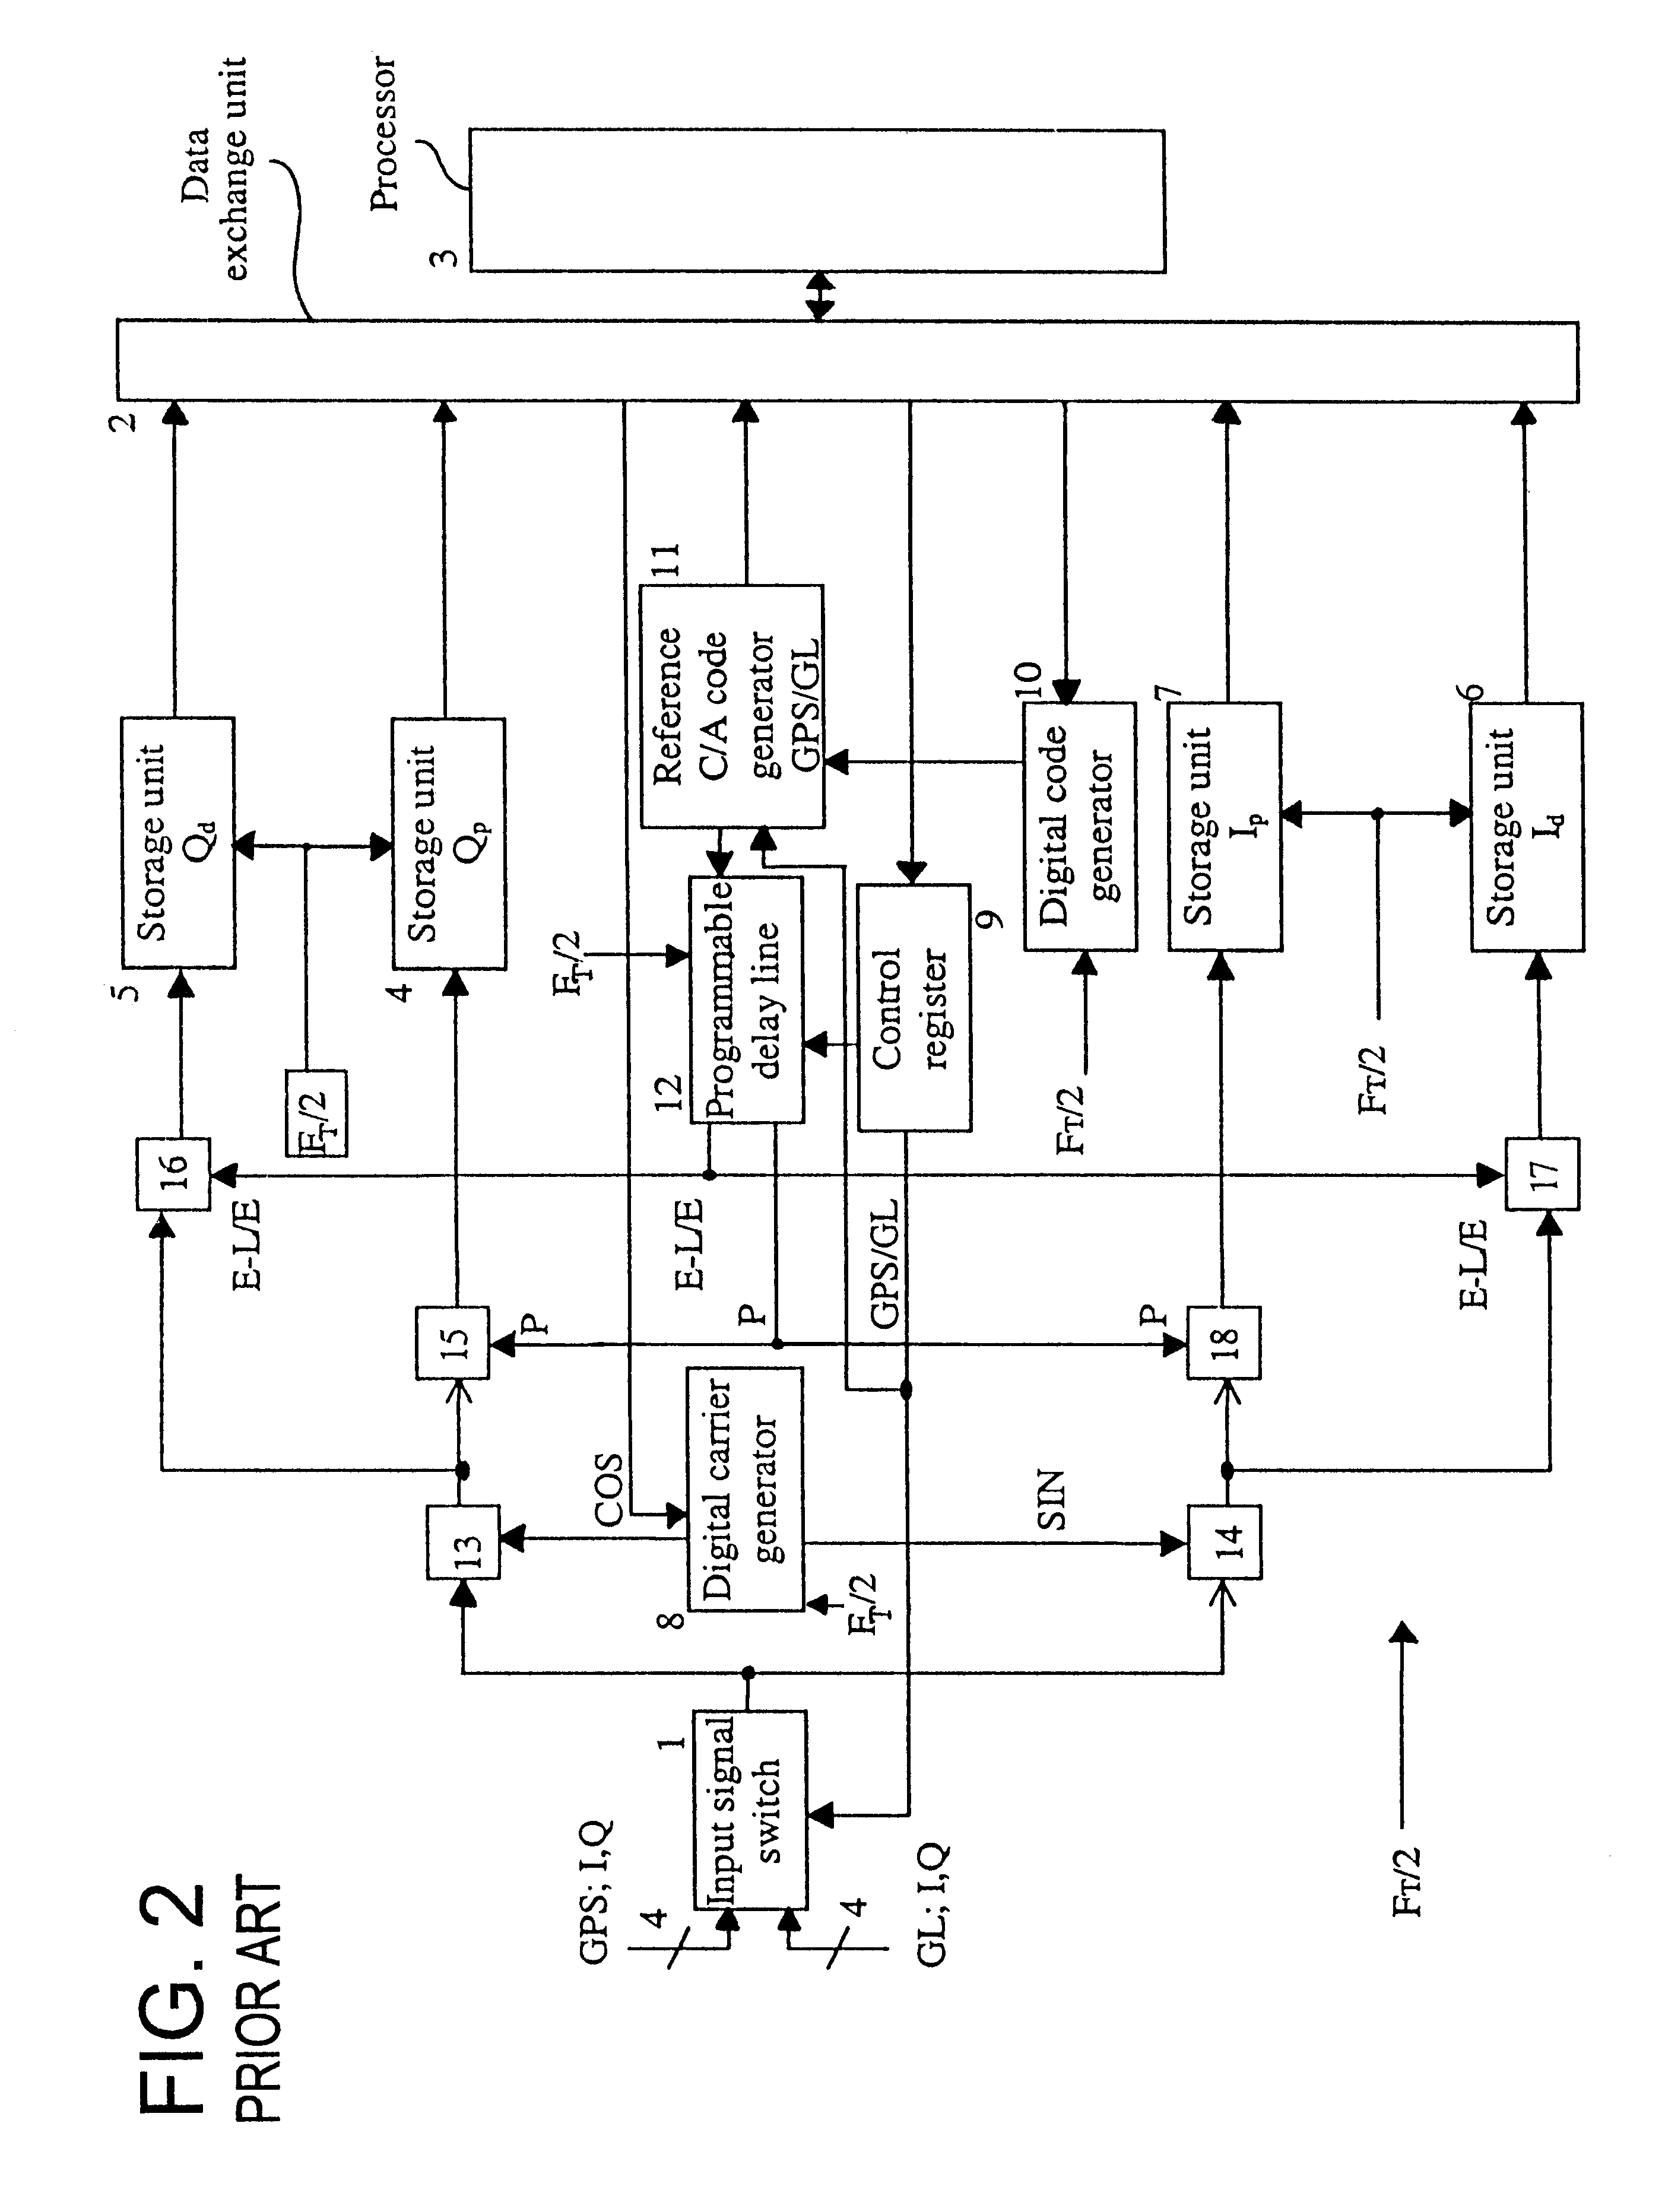 Digital correlator for a receptor of signals from satellite radio-navigation systems